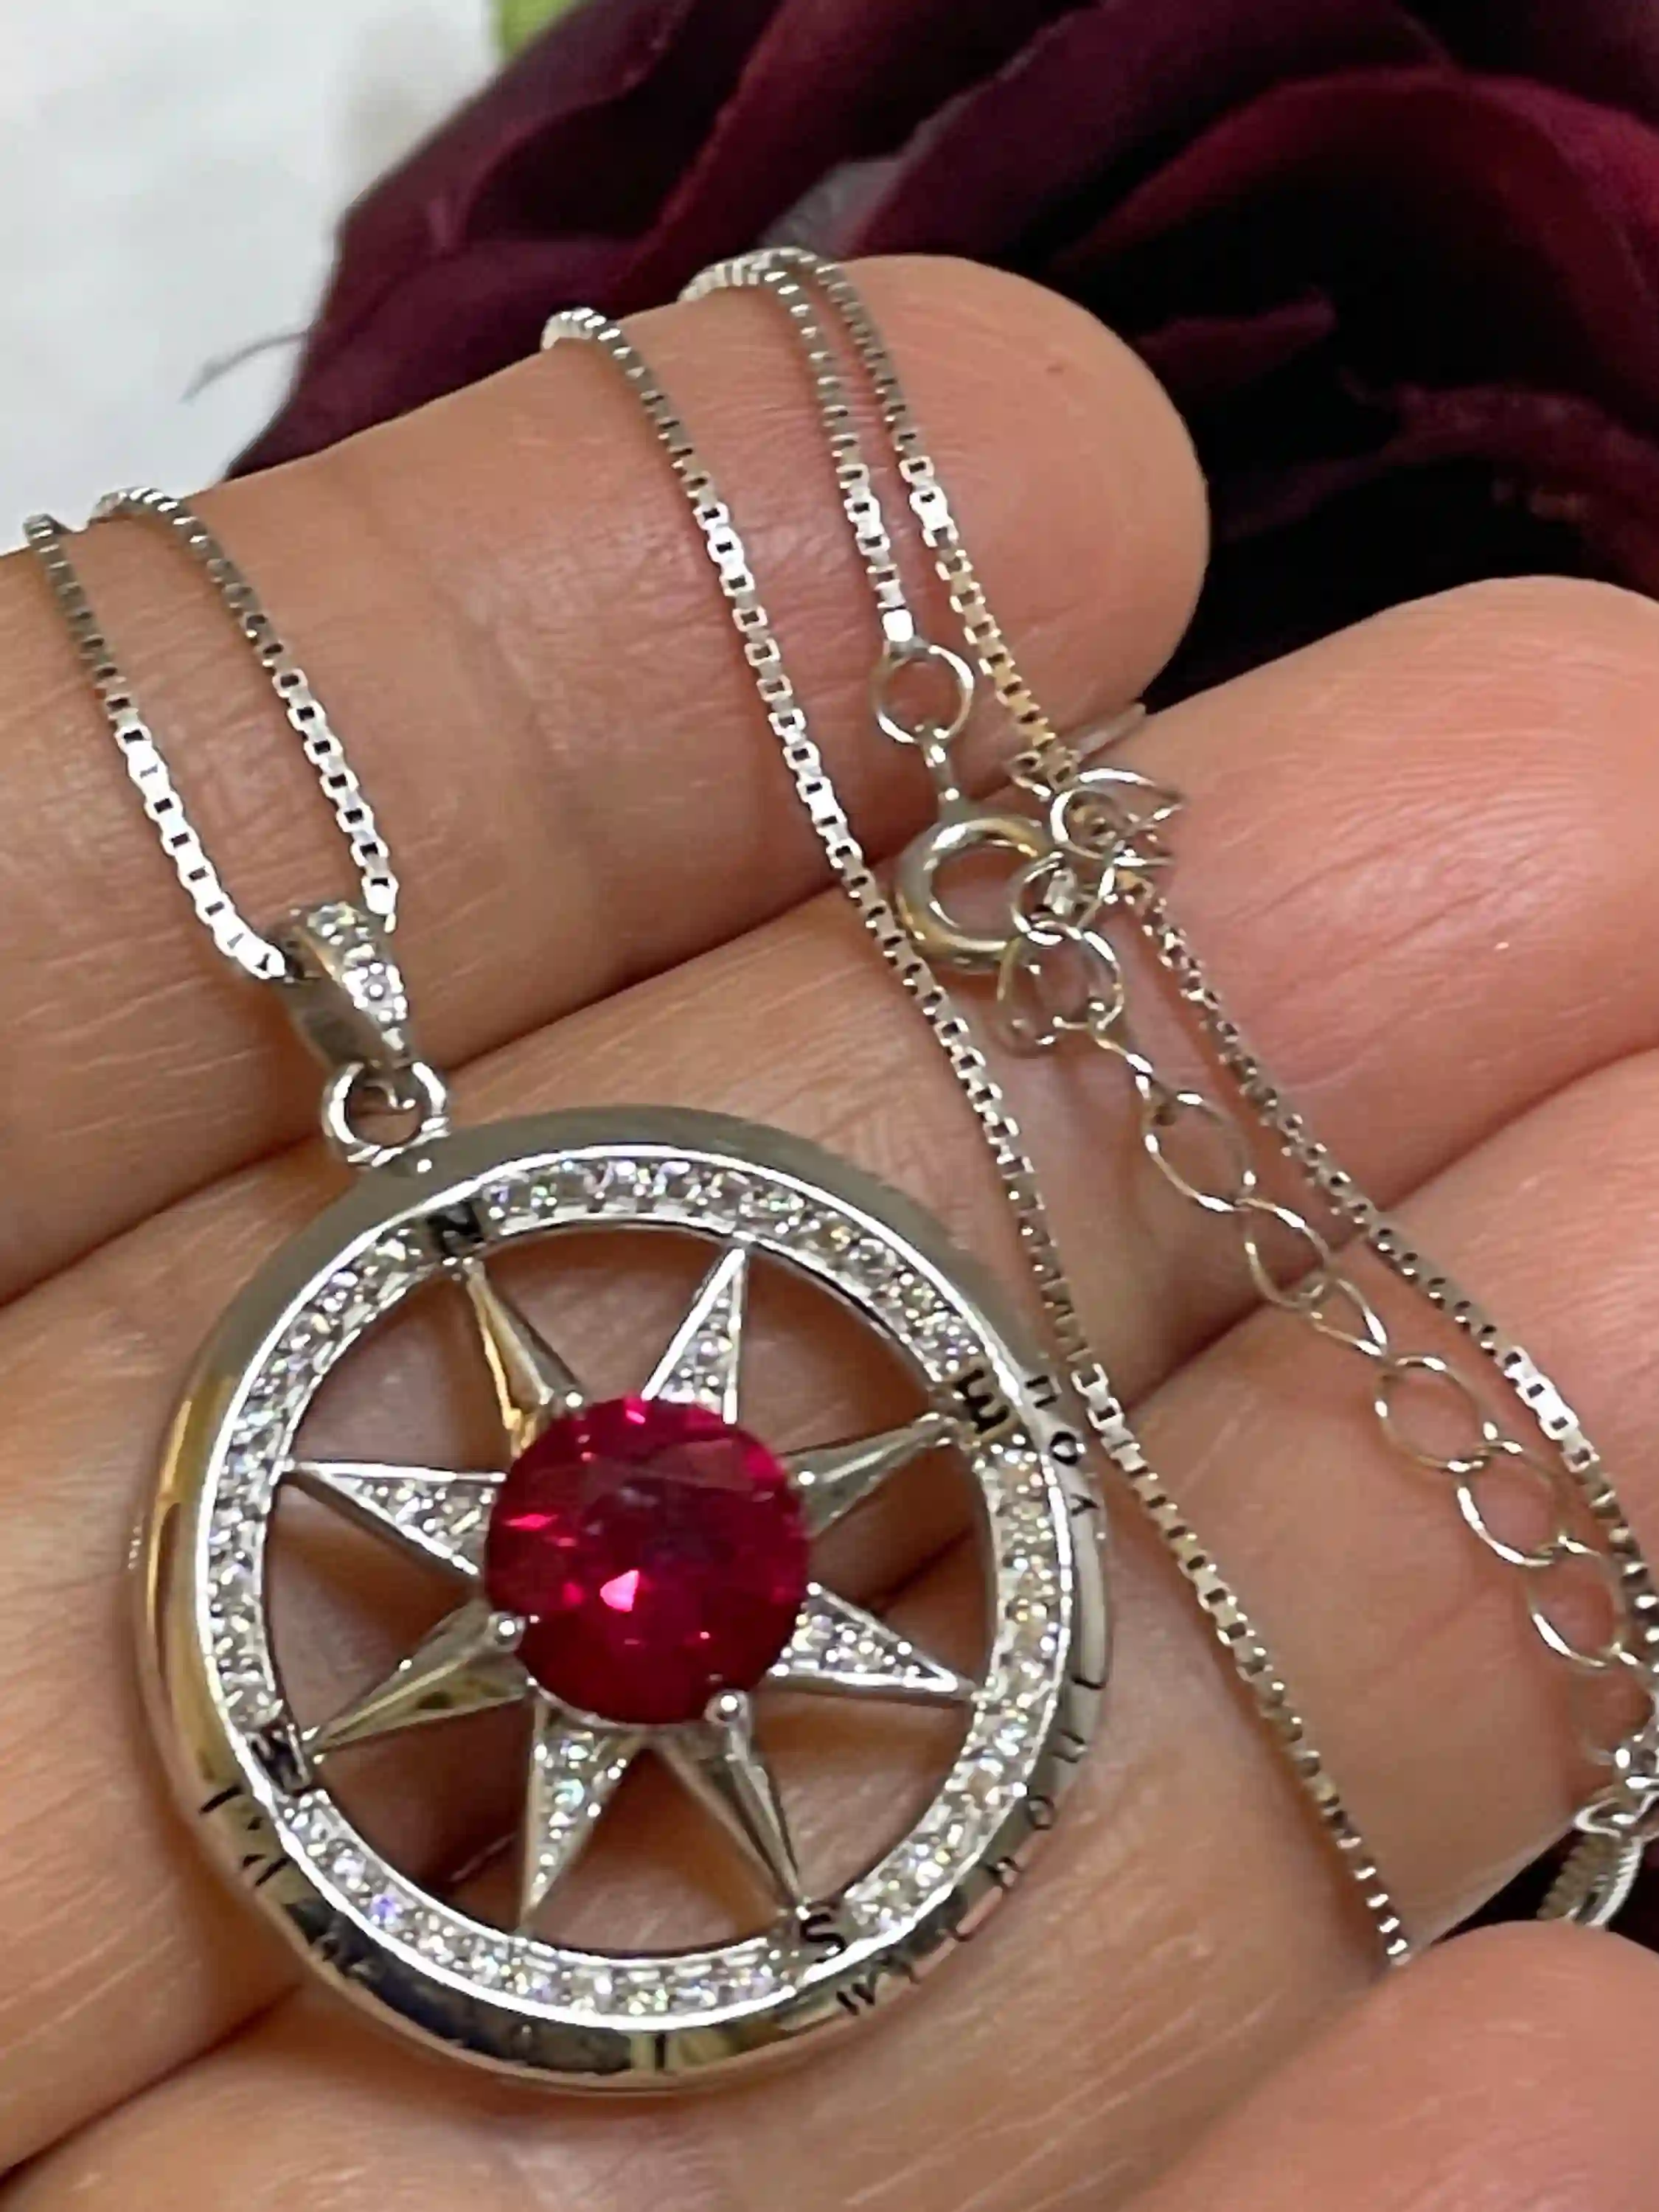 3.5 carat Diamond Pendant Compass Jewelry NATURAL RUBY 40th Wedding Anniversary Ruby Compass White Gold Compass Sterling Silver LOVE Compass 